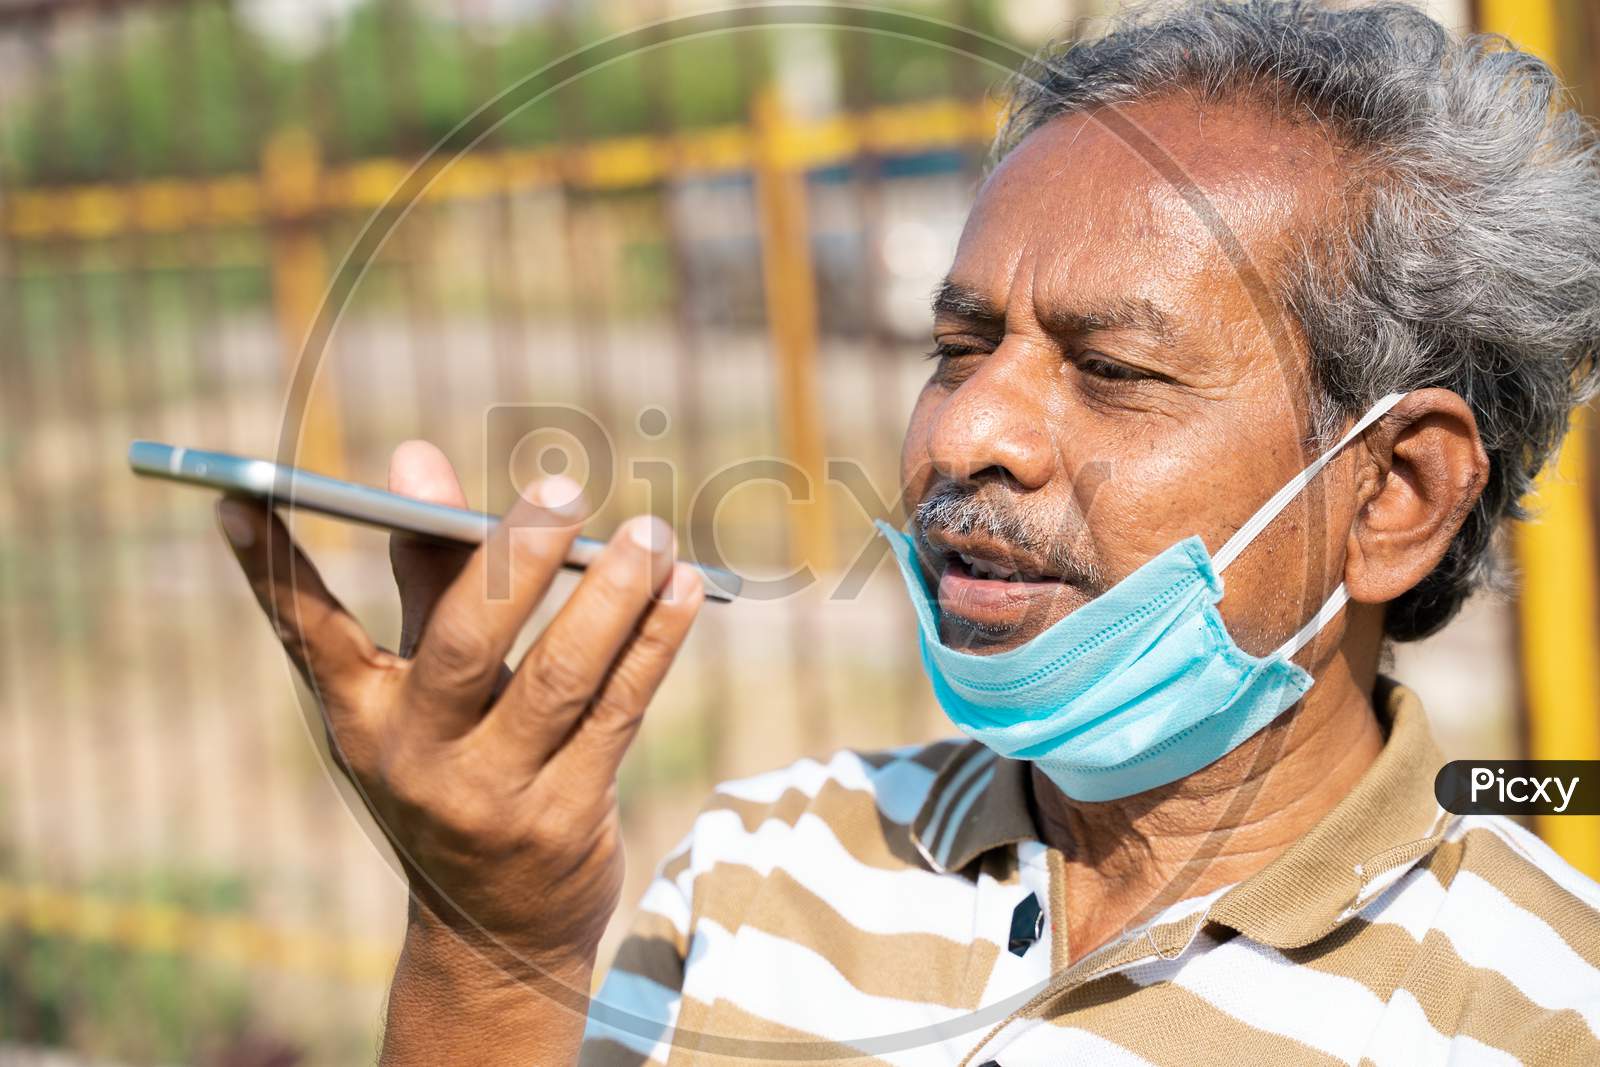 Senior Man With Medical Face Mask Below The Jaw Talking On Mobile Phone At Park - Concept Of Improper Mask Use Due To Coronavirus Covid-19 Pandemics.